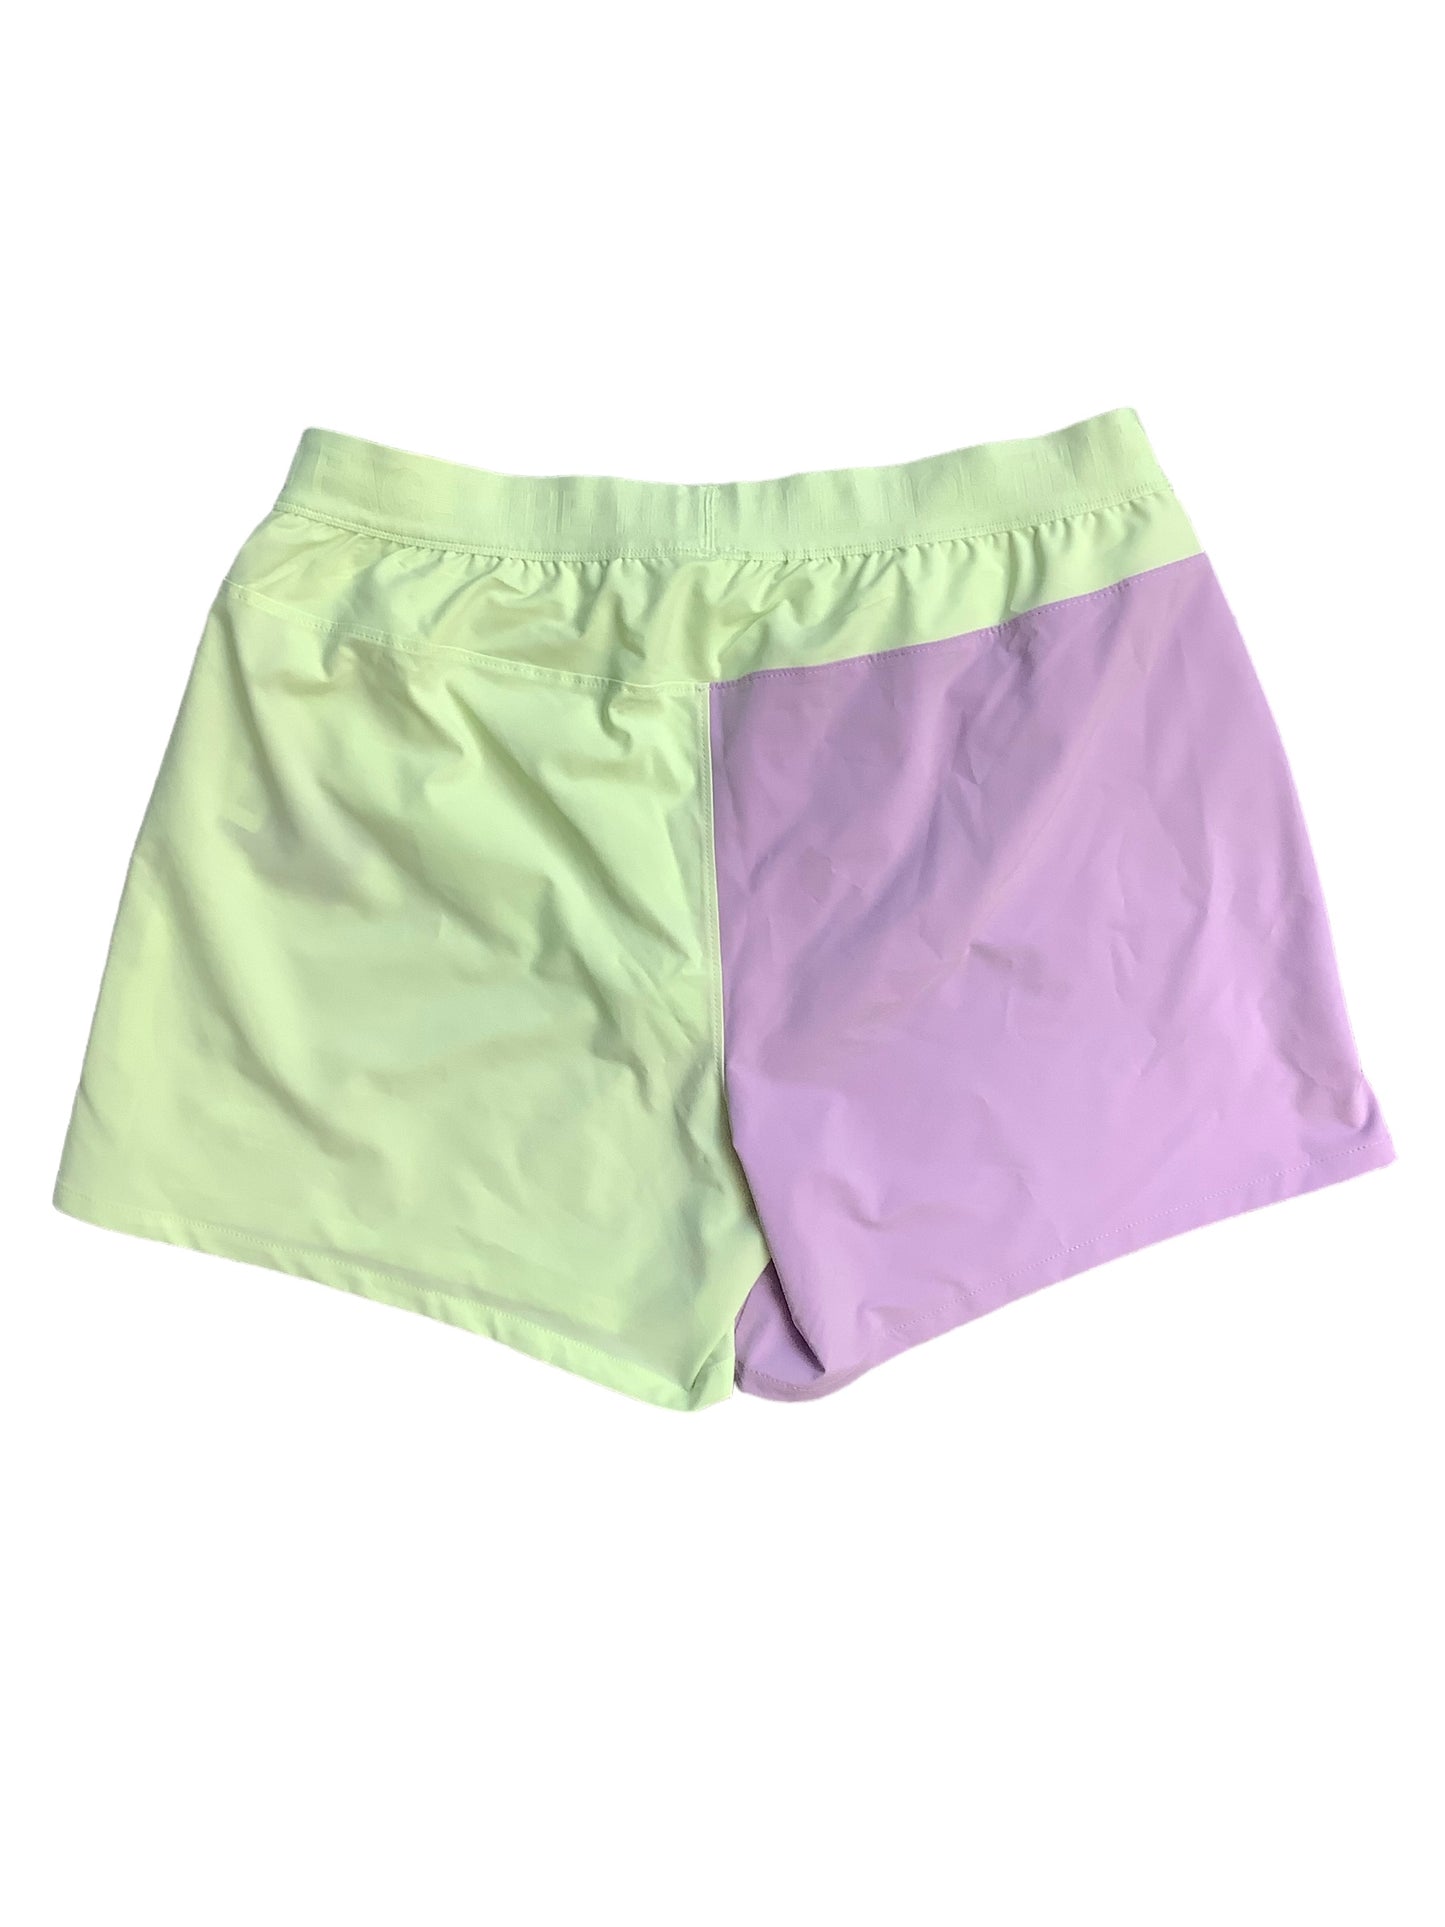 Athletic Shorts By The North Face  Size: L